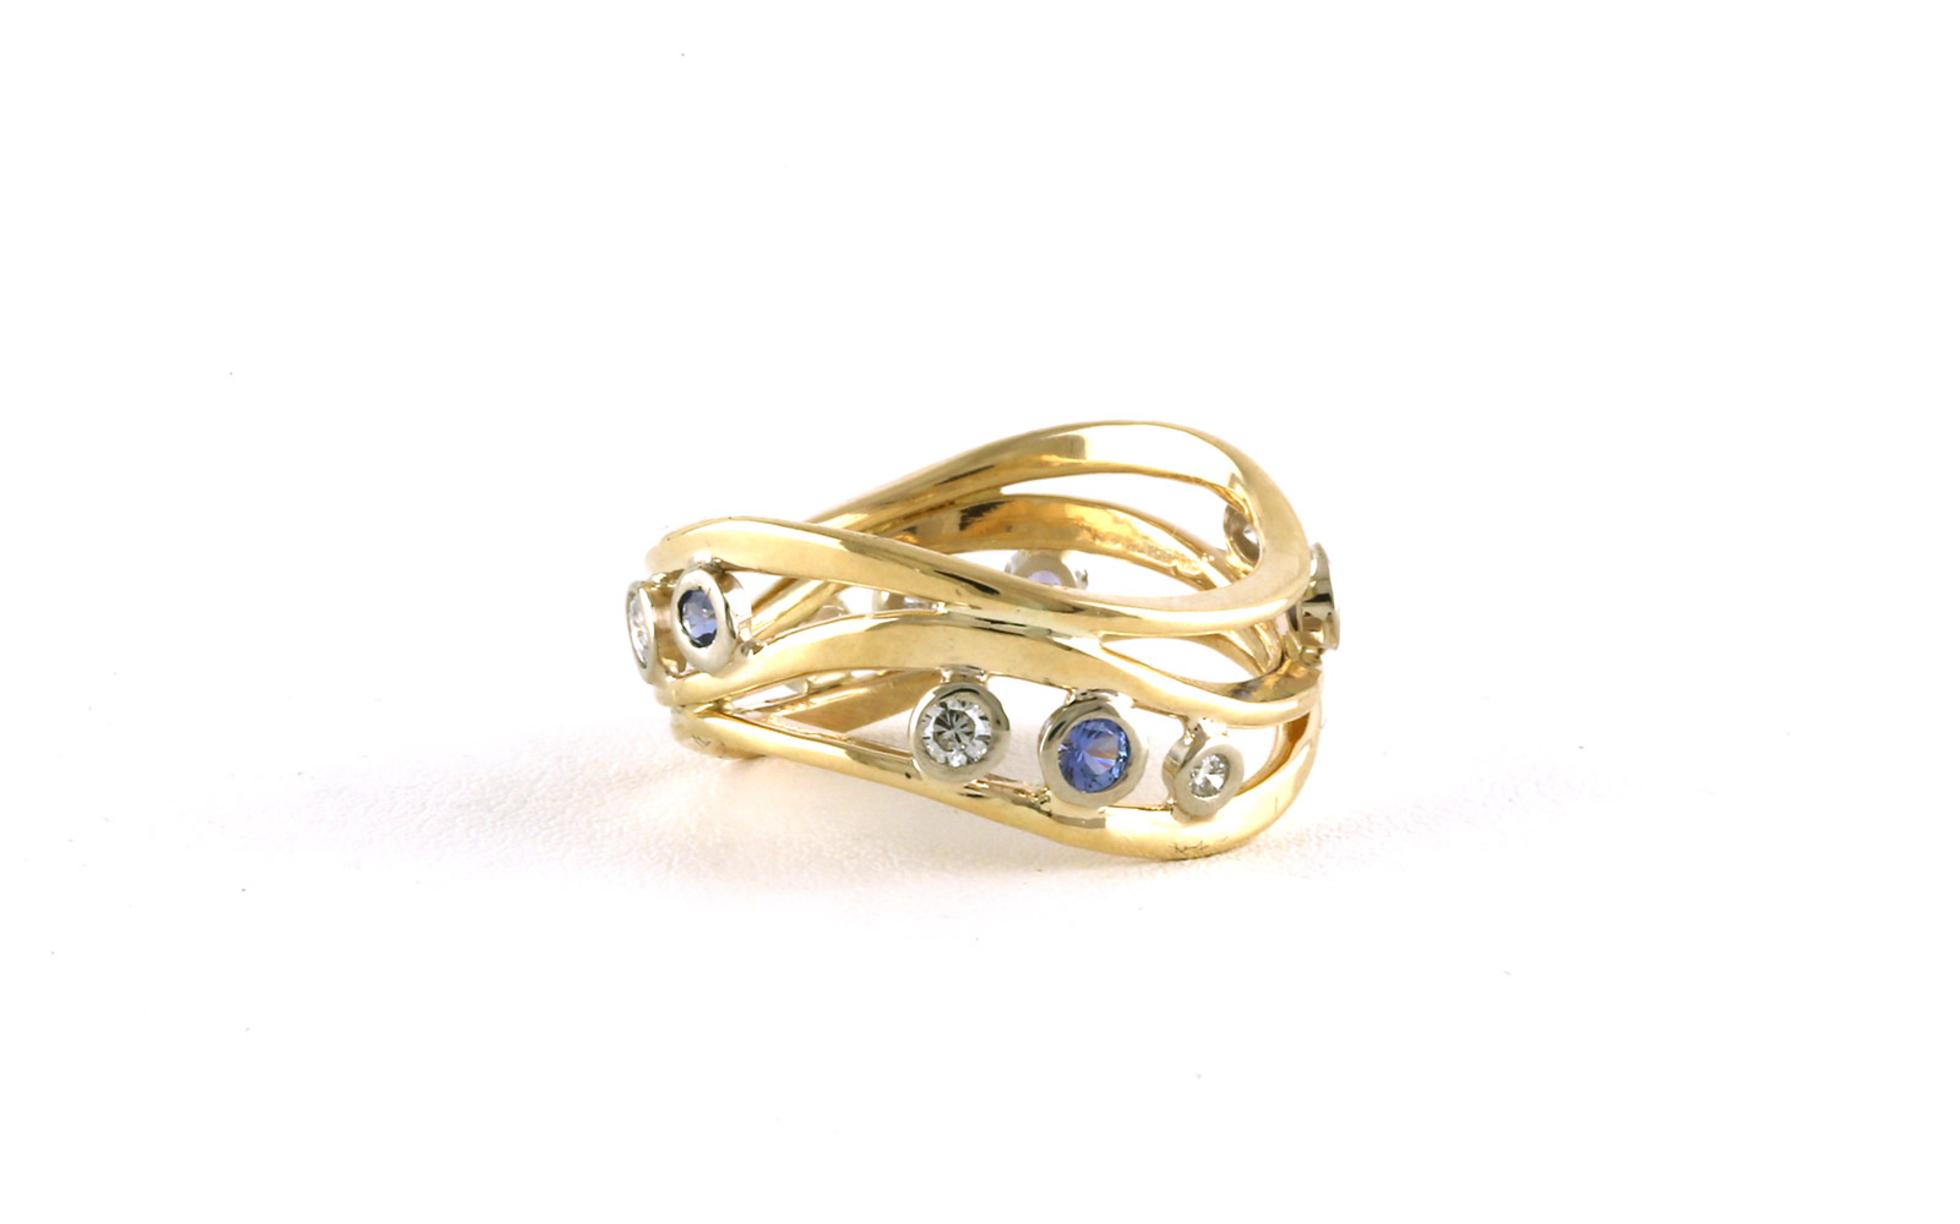 Wavy-style 3-Row Bezel-set Montana Yogo Sapphire and Diamond Ring in Two-Tone Yellow and White Gold (0.56cts TWT)